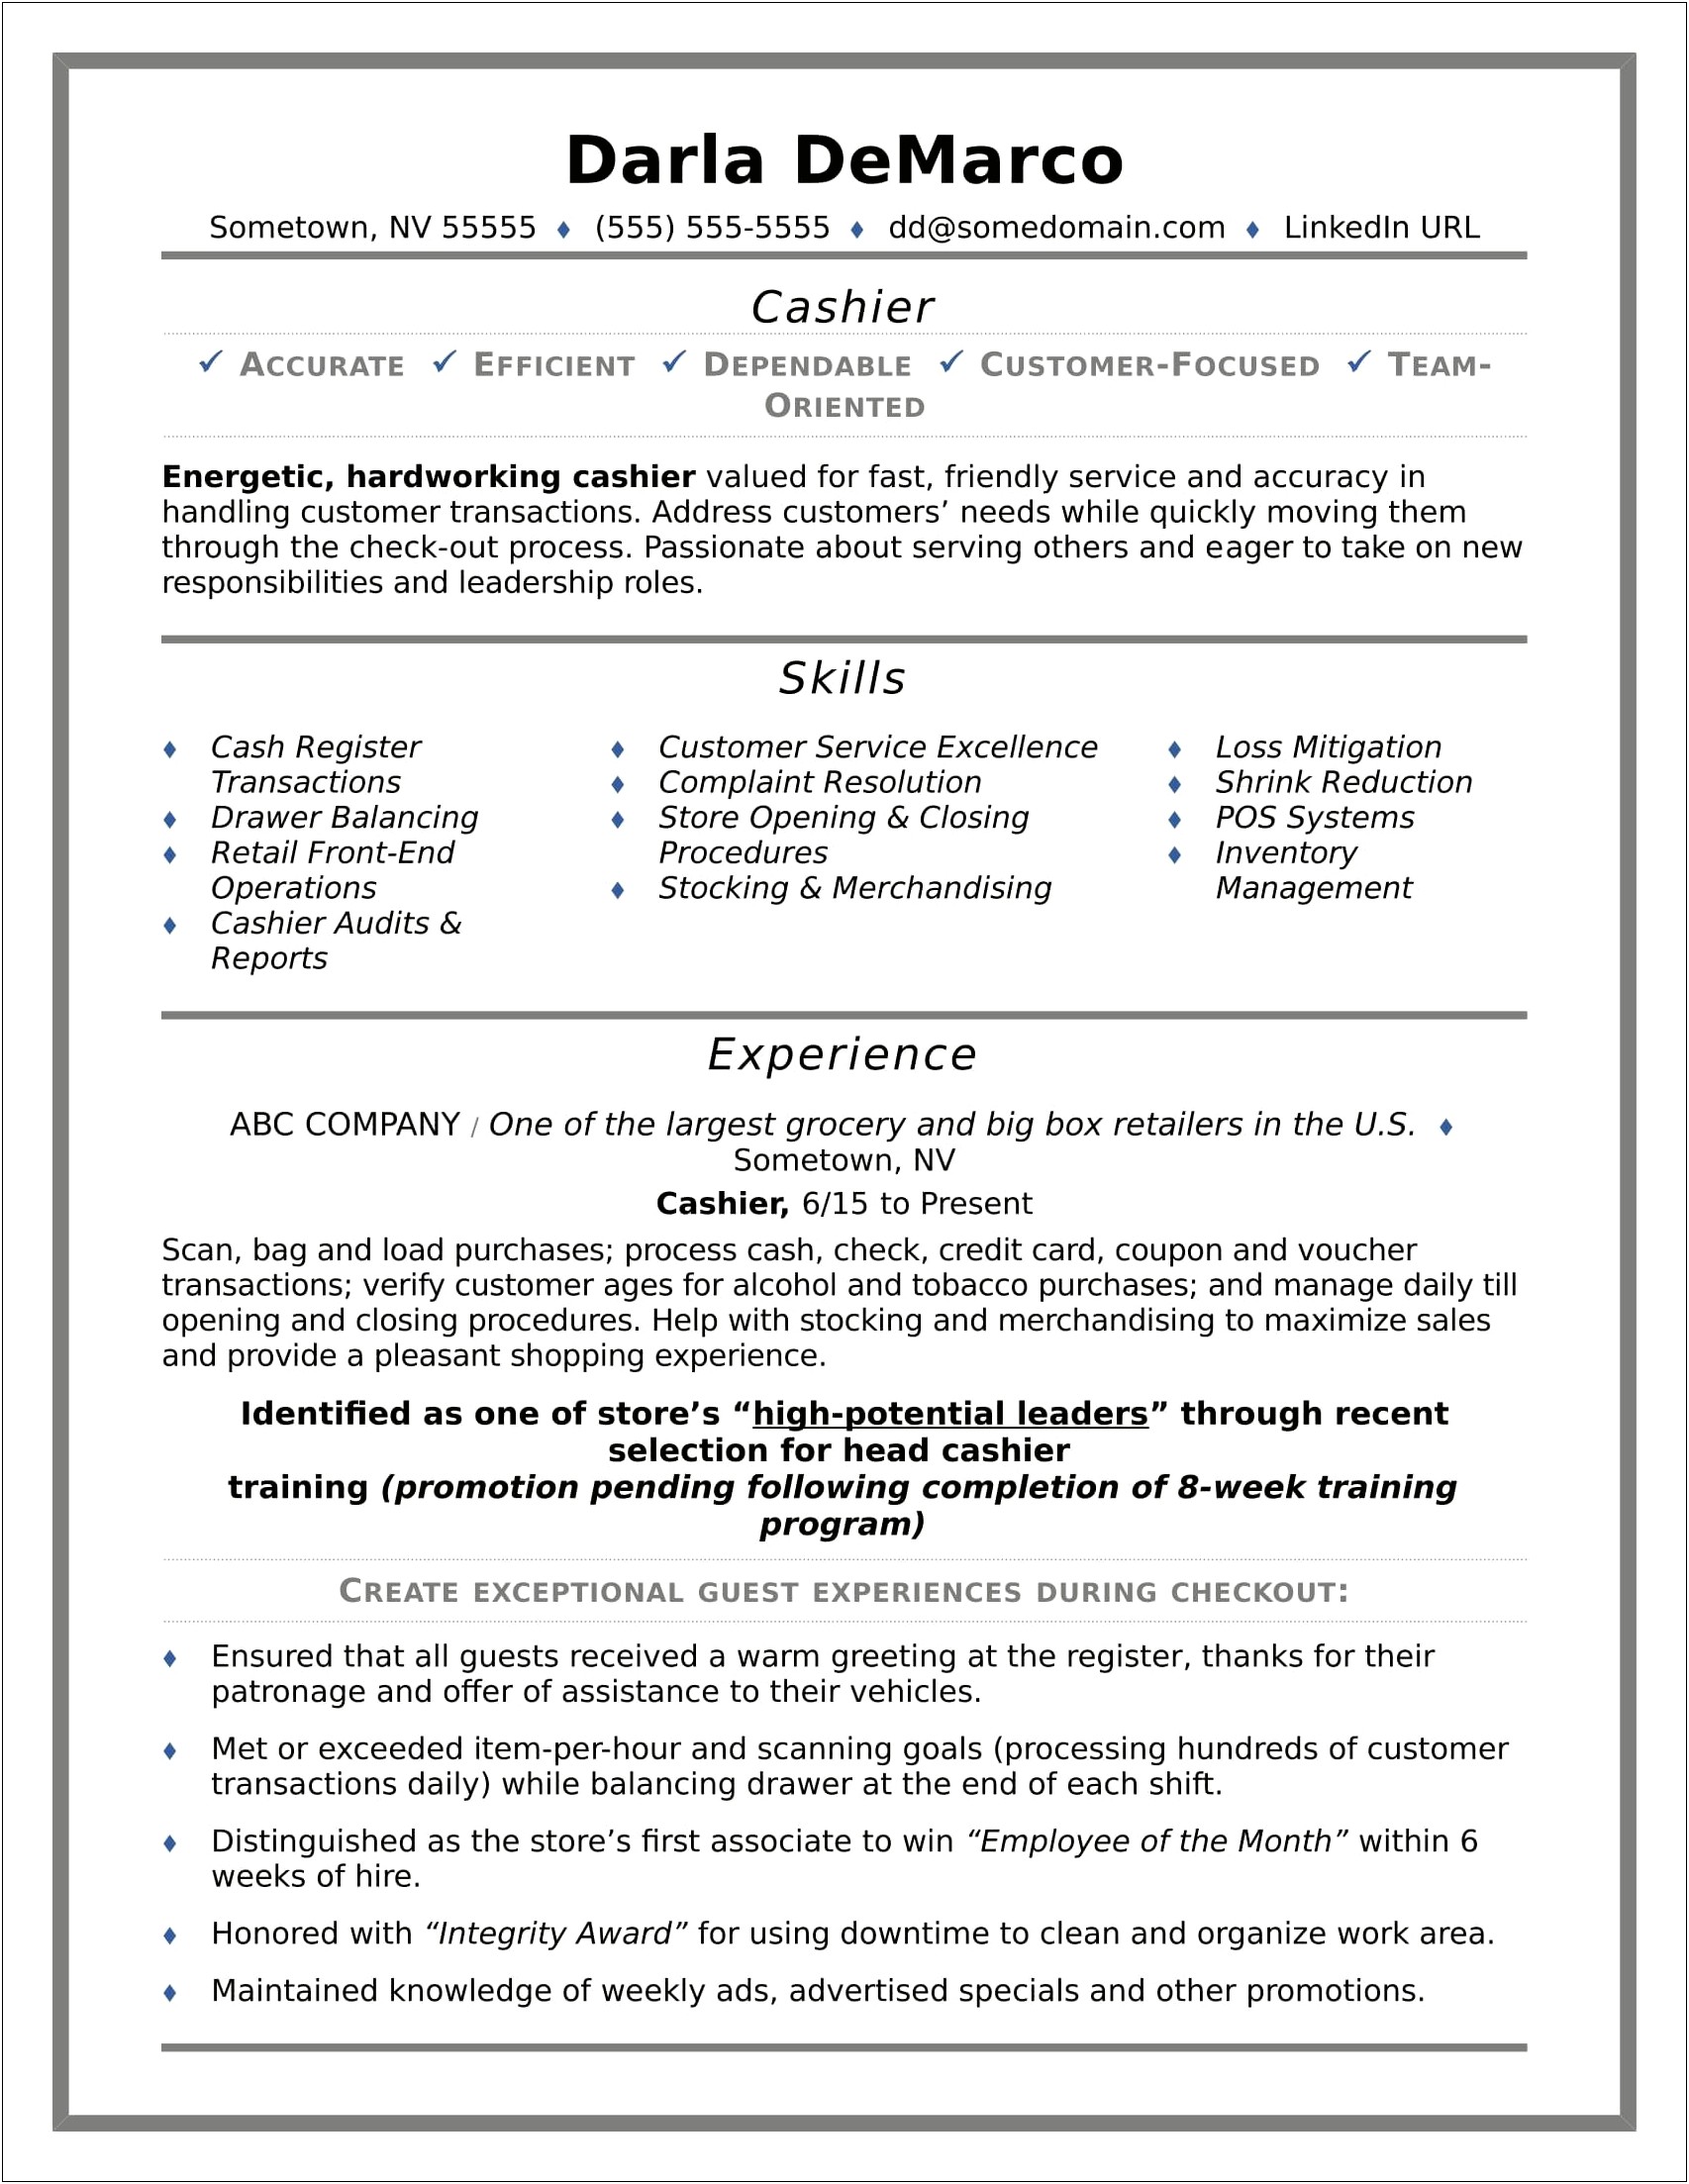 Resume Blurb Examples Explaning Company